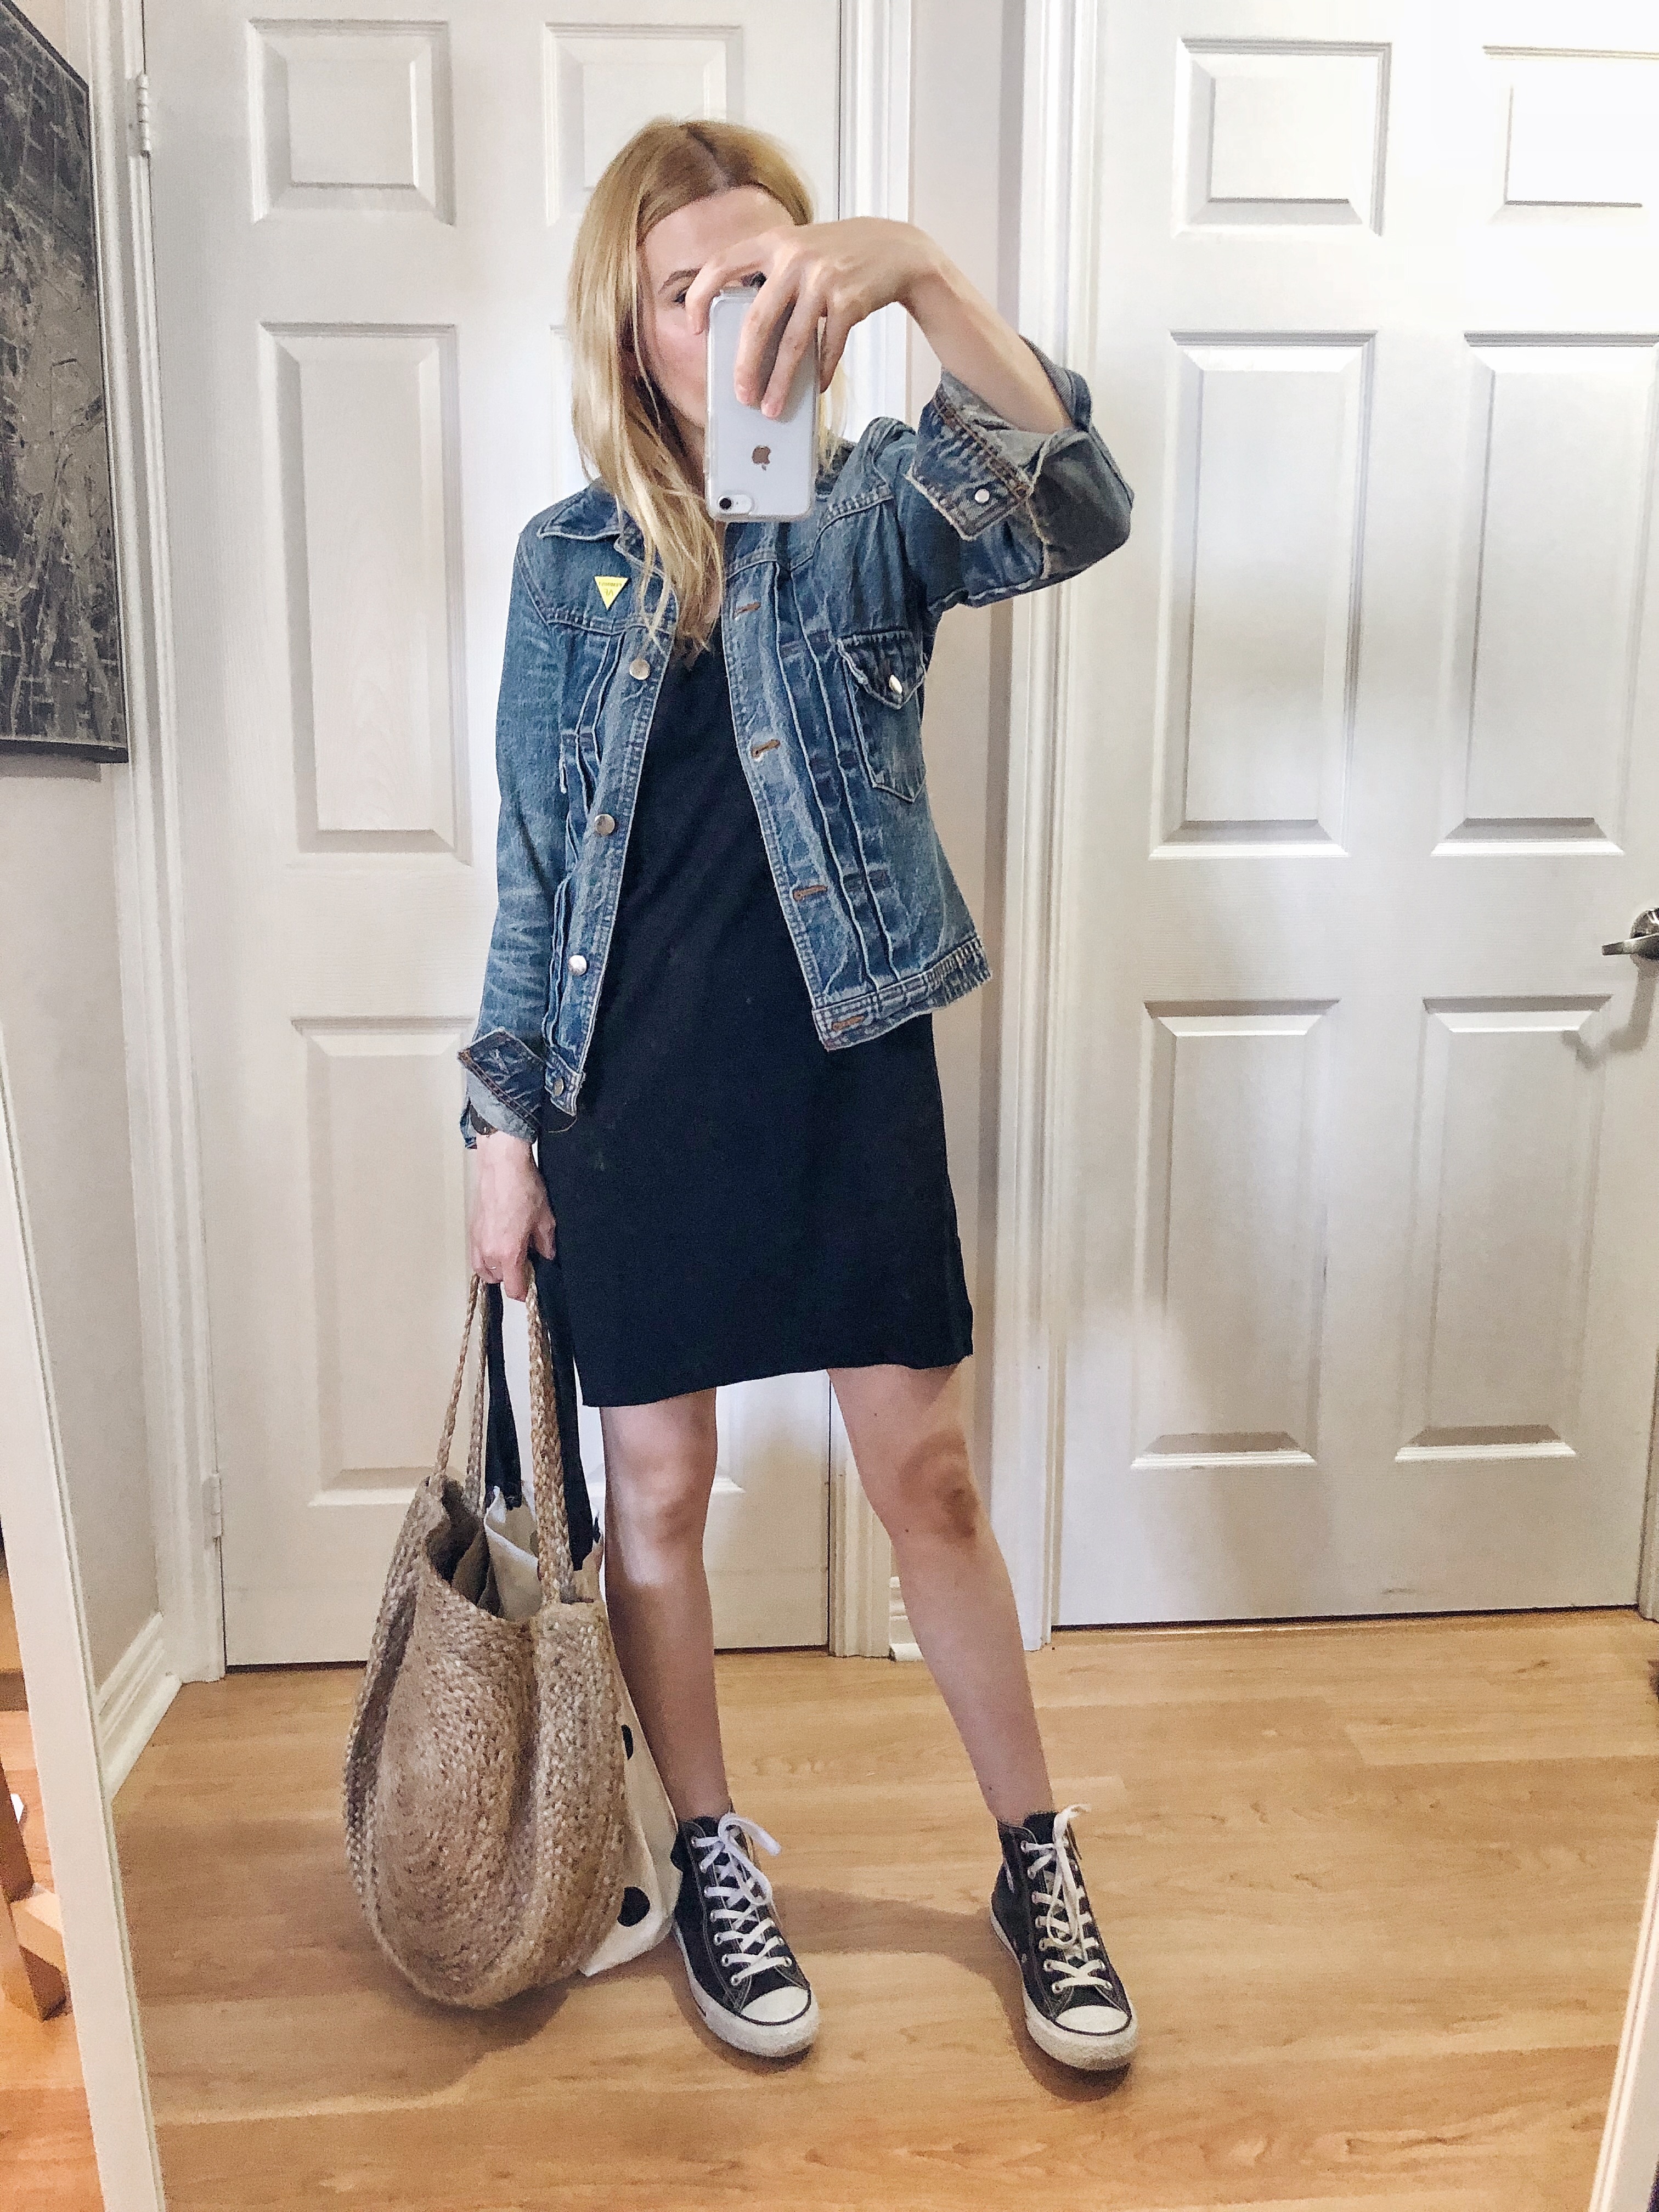 I am wearing a t-shirt dress, jean jacket, a large woven bag and converse high tops.